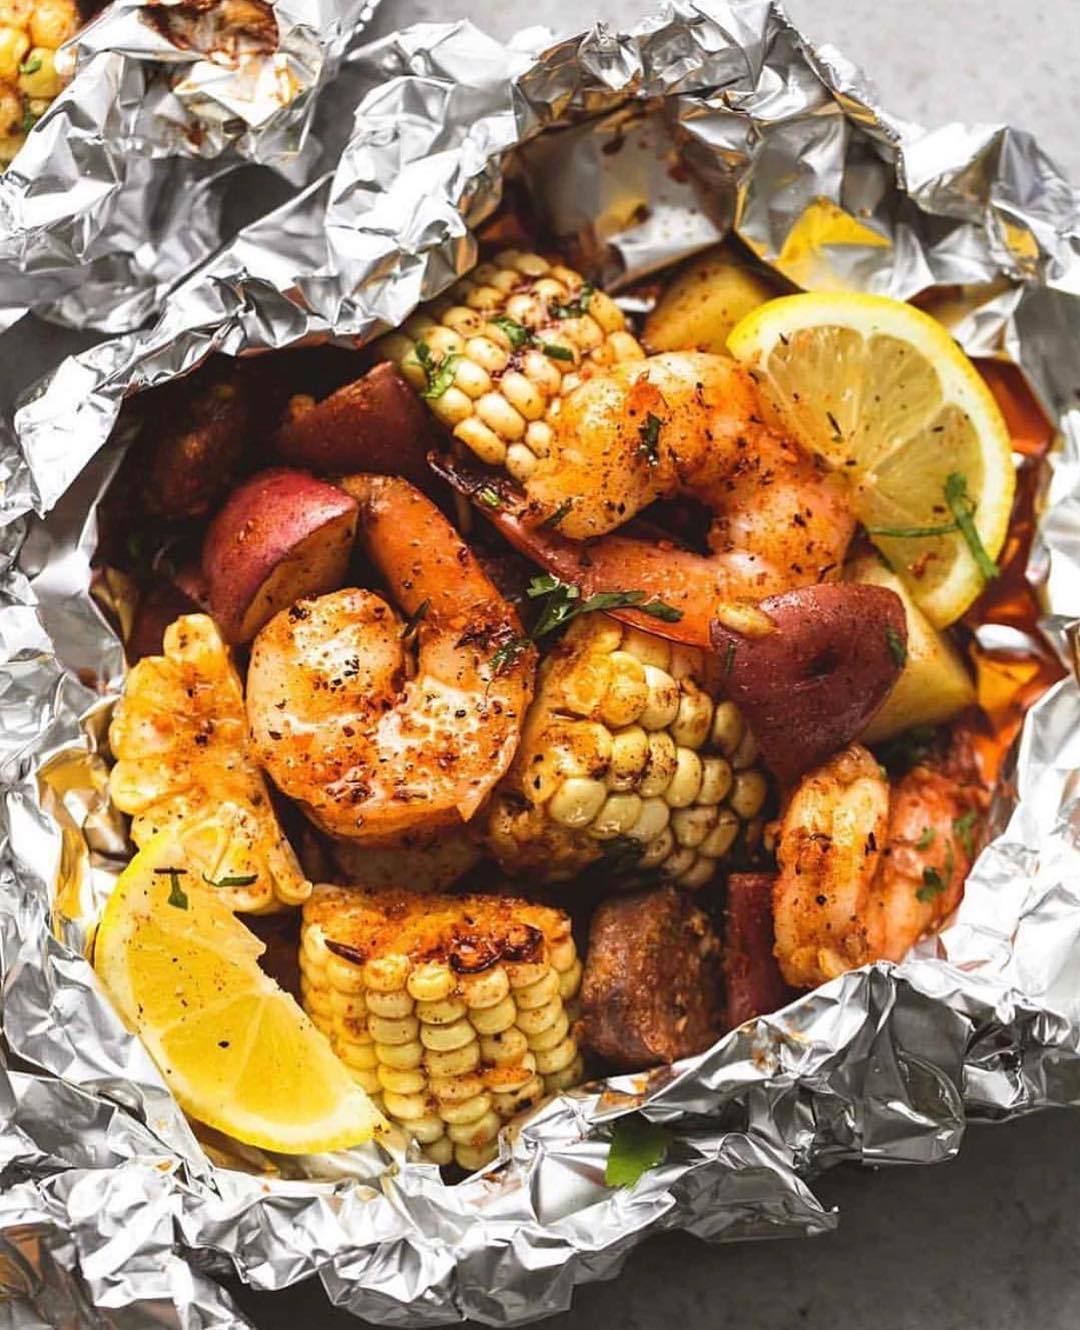 Shrimp Boil Foil Packs
By @cremedelacrumb1
Easy, tasty shrimp boil dinners baked or grilled in foil with homemade seasoning, fresh lemon, and brown butter sauce.
INGREDIENTS:
- 1 pound shrimp, peeled and de-veined
- 2 ears of corn on the cob,...